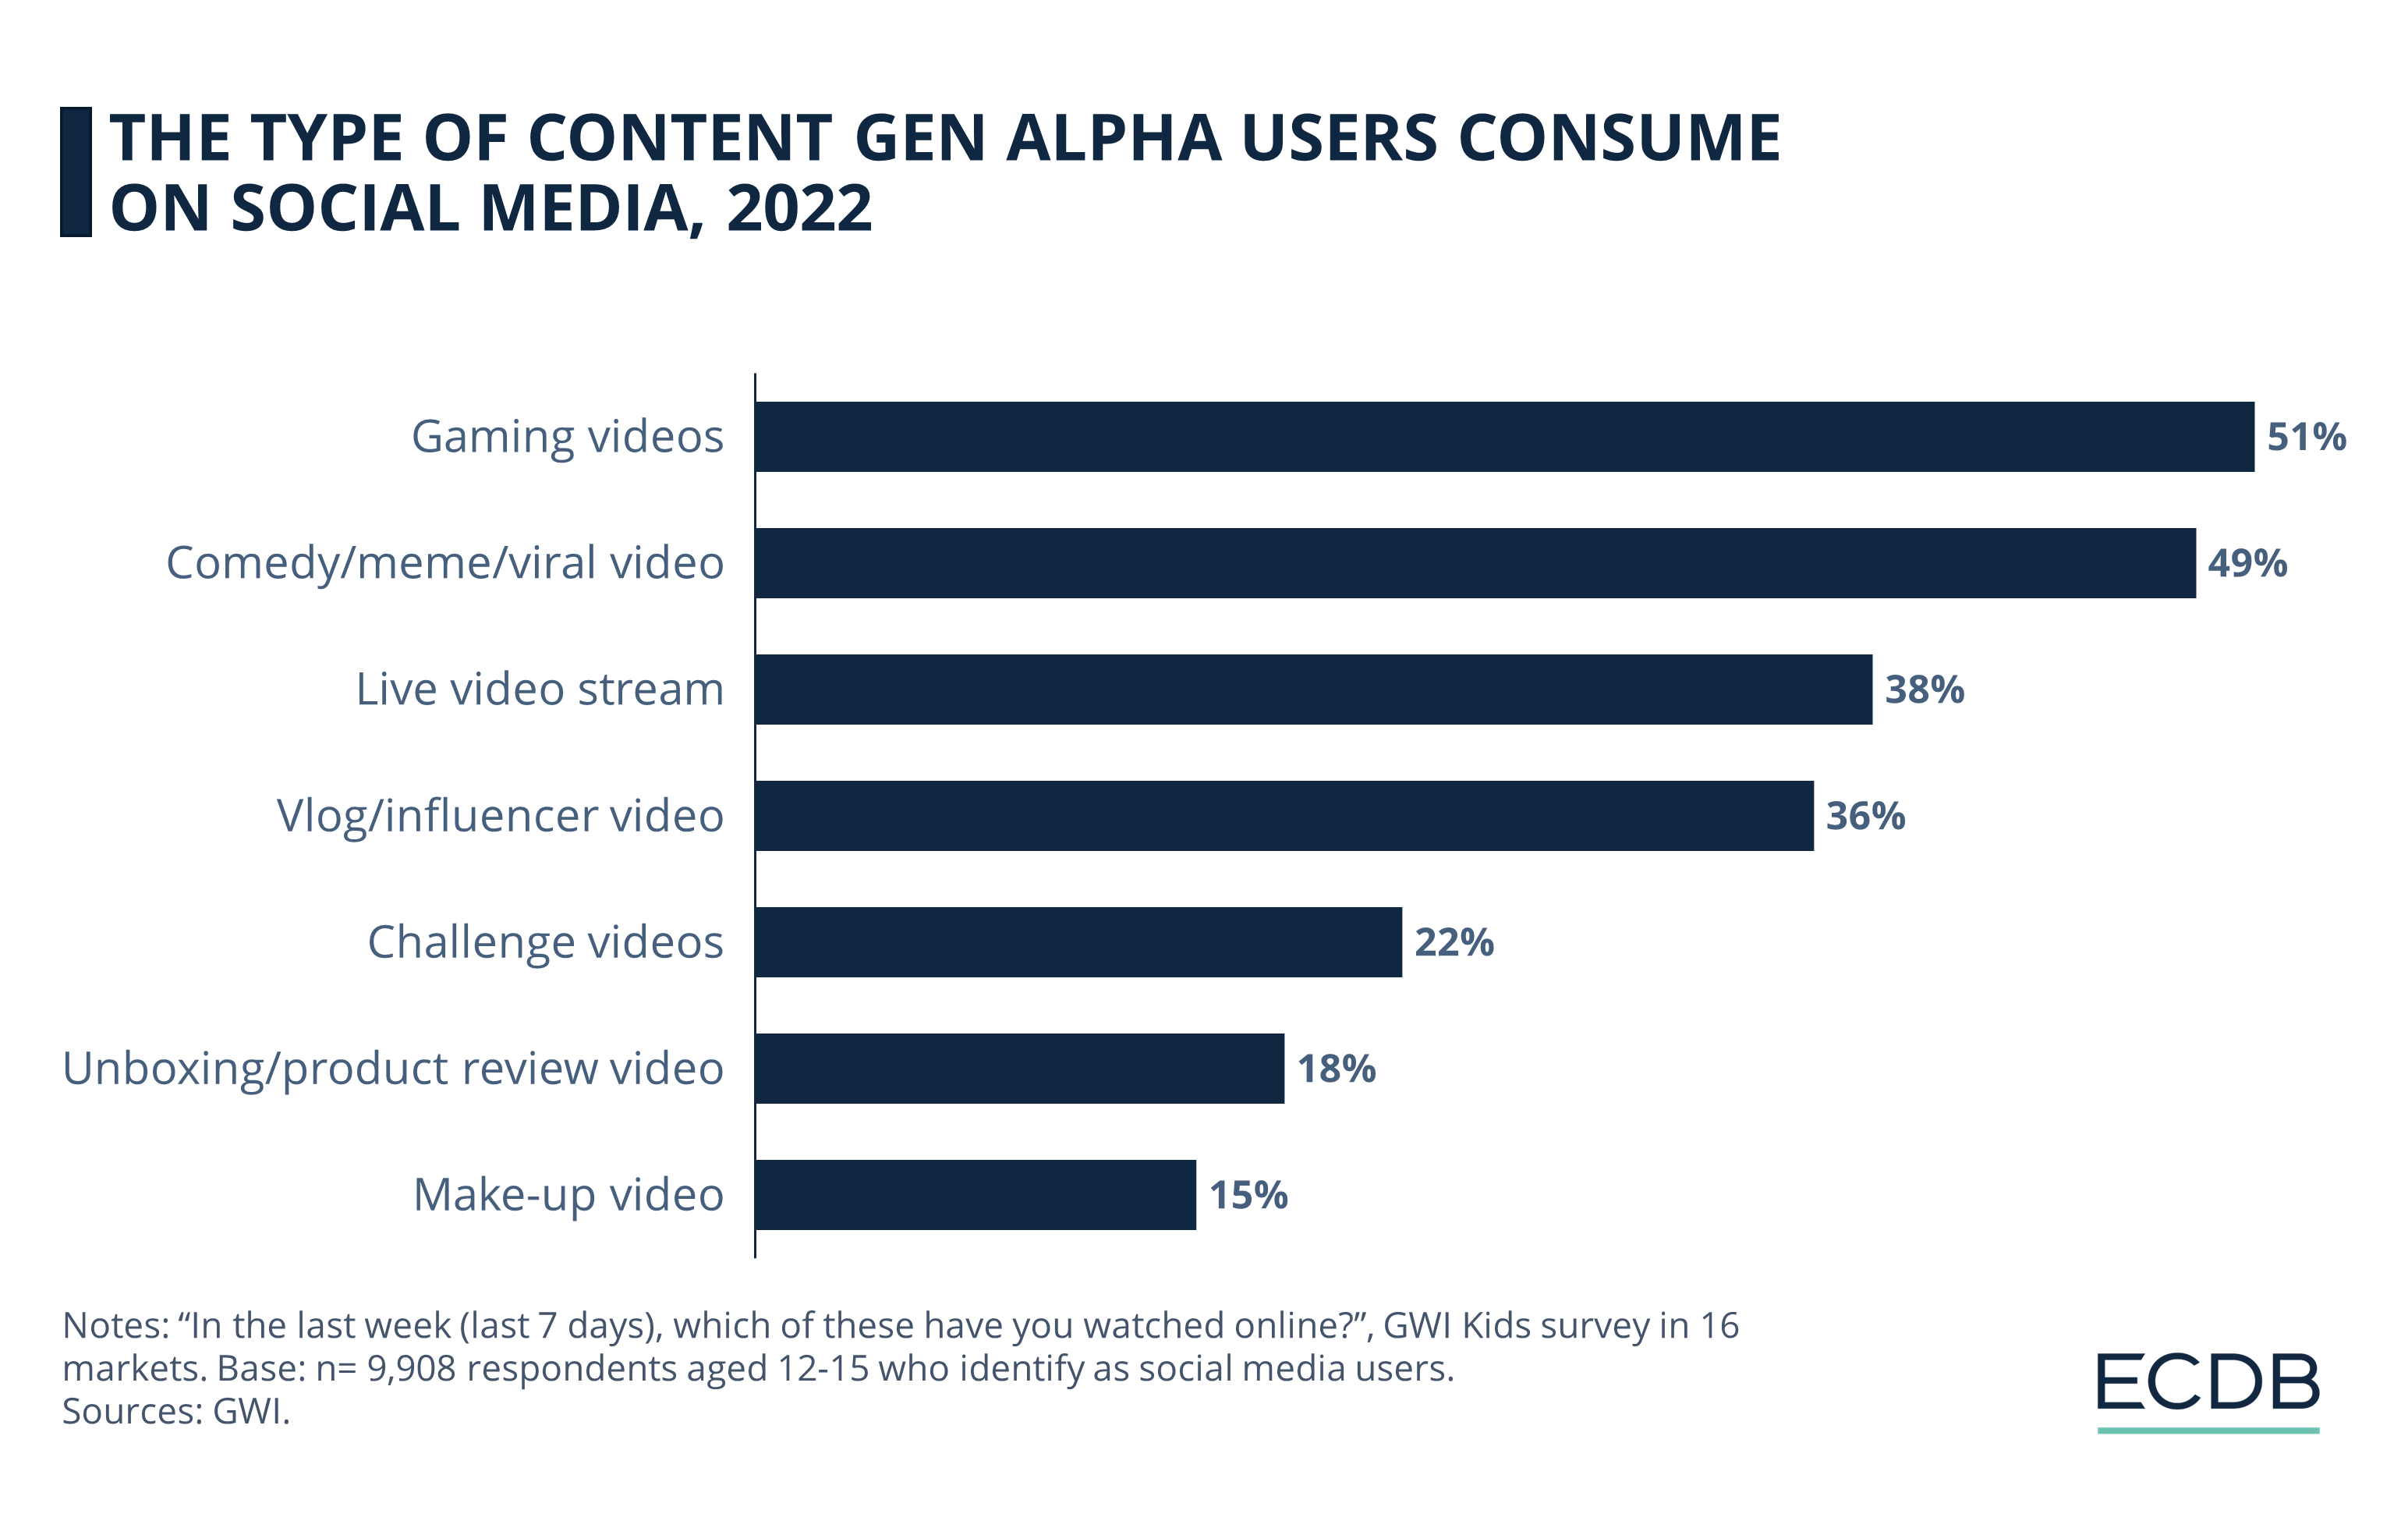 The Type of Content Gen Alpha Users Consume on Social Media, 2022